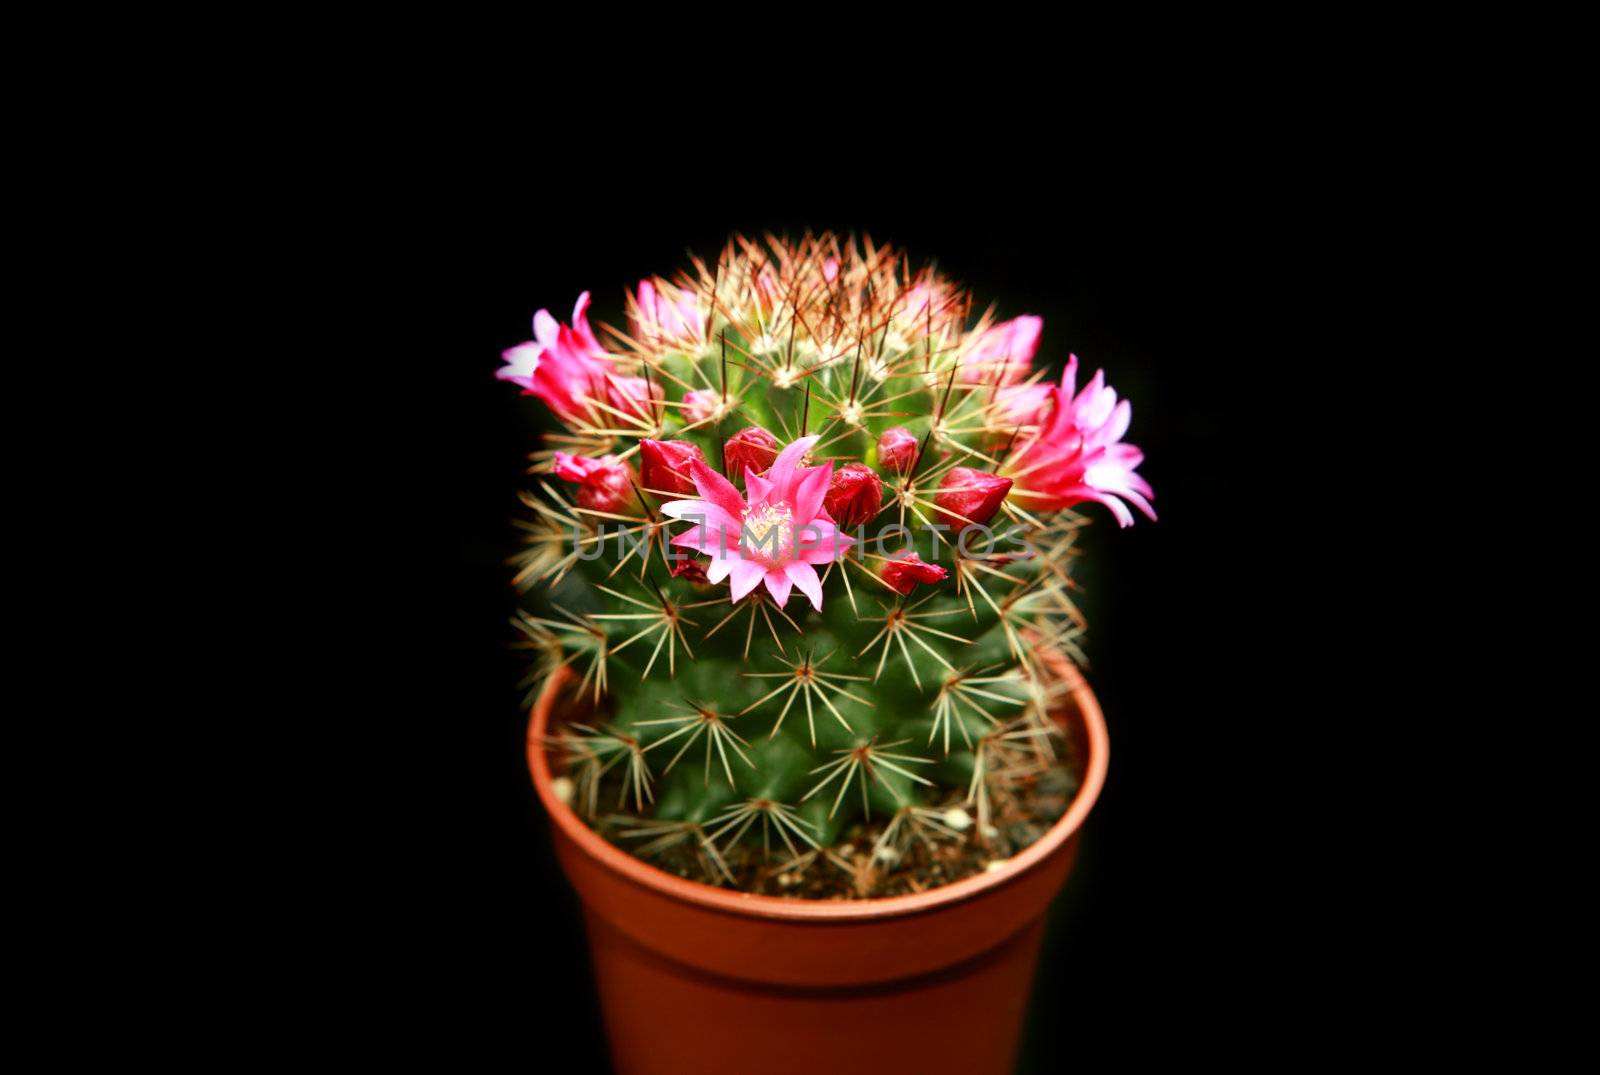 blossoming cactus with purple flowers on black background